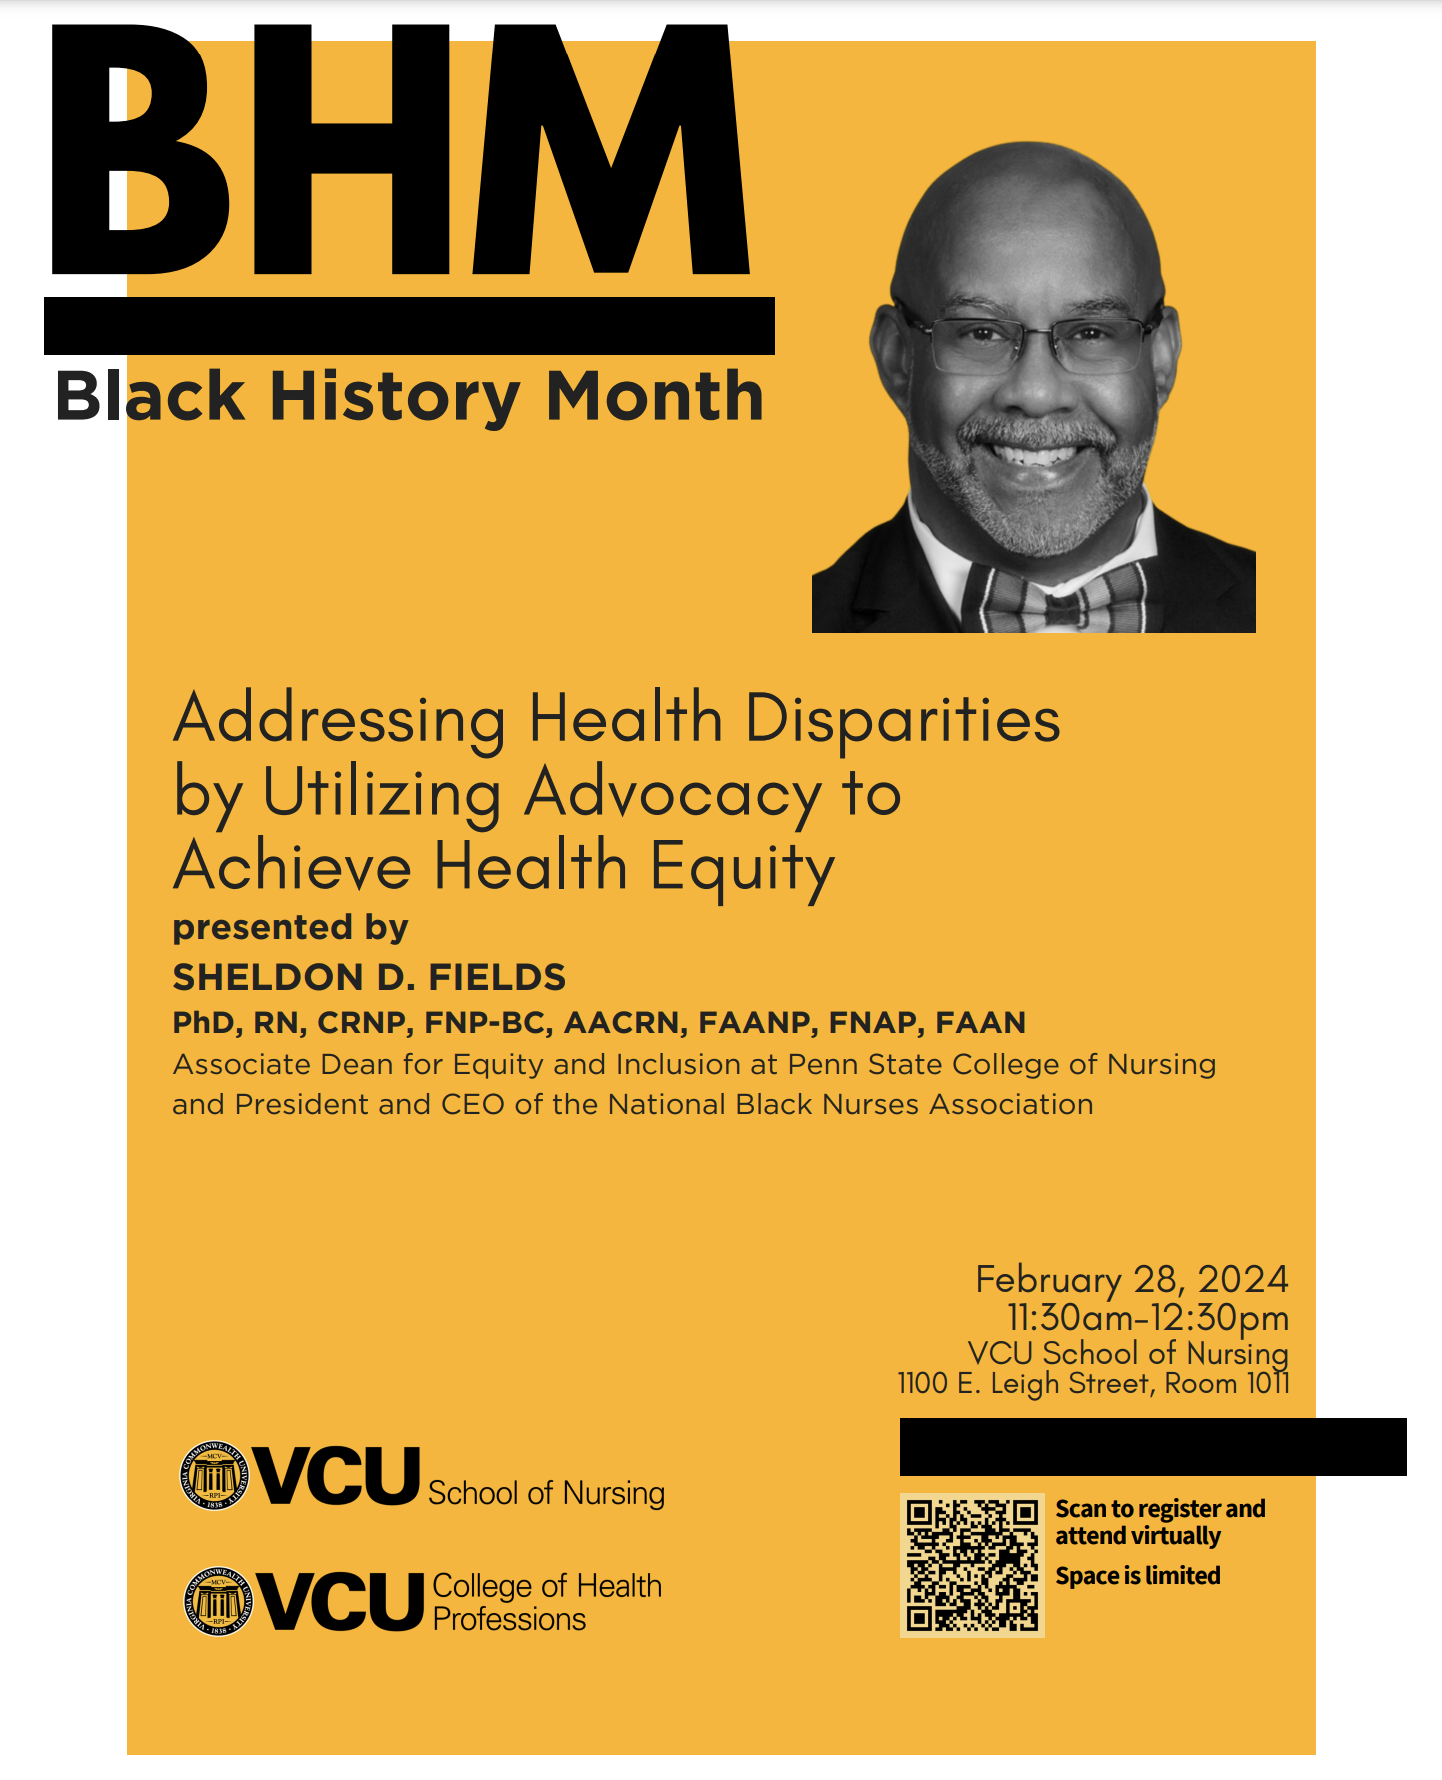 Black History Month Addressing Health Disparities by Utilizing Advocacy to Achieve Health Equity presented by Sheldon D. Fields, PhD, RN, CRNP, FNP-BC, AACRN, FAANP, FNAP, FAAN Associate Dean for Equity and Inclusion at Penn State College of Nursing and President and CEO of the National Black Nurses Association Feb 28 2024 11:30 am - 12:30 pm VCU School of Nursing 1100 E Leigh St Room 1011